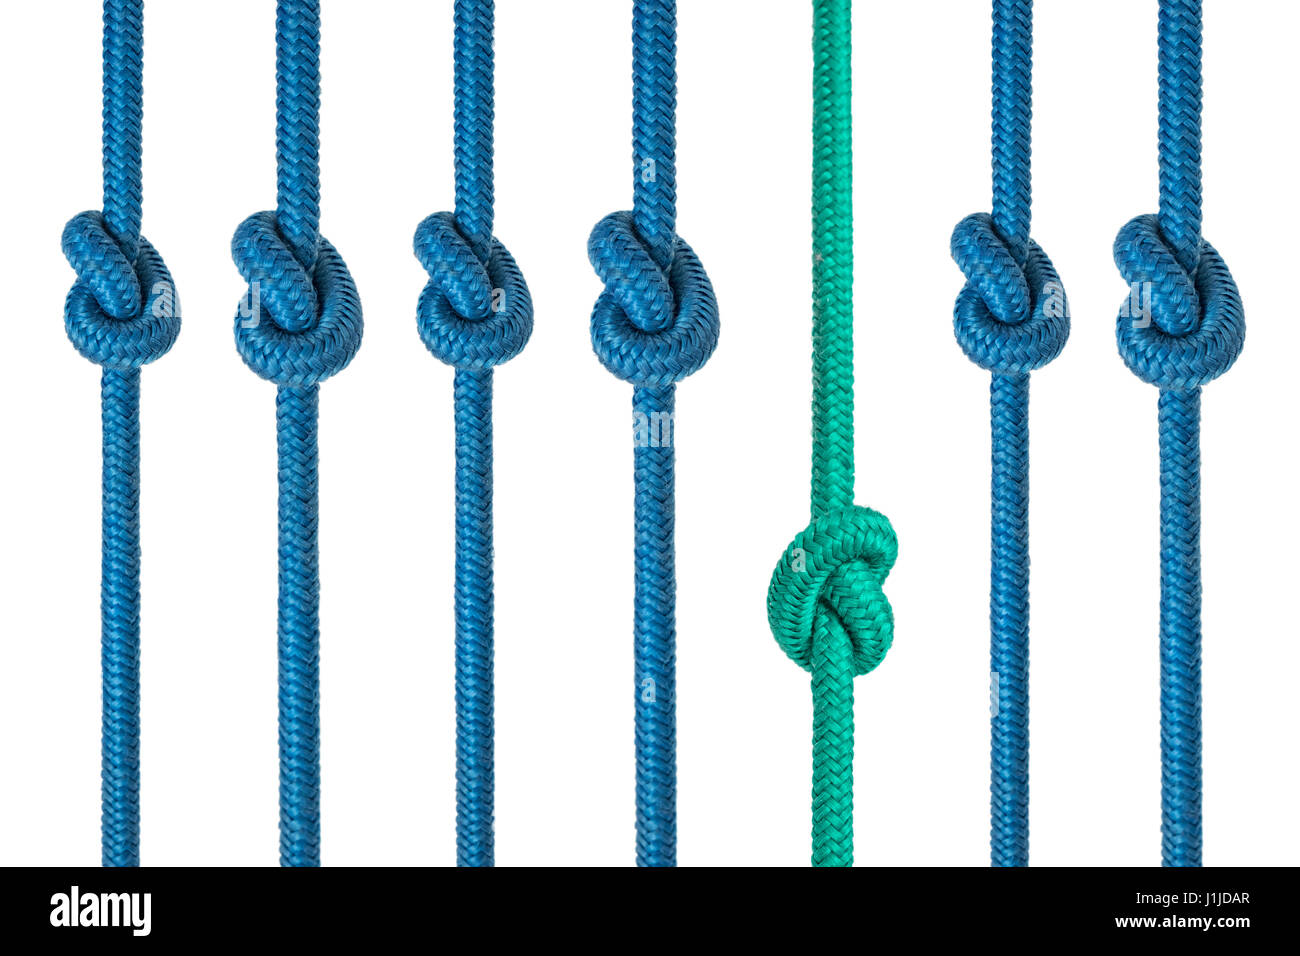 standing out from the crowd concept - knotted ropes Stock Photo